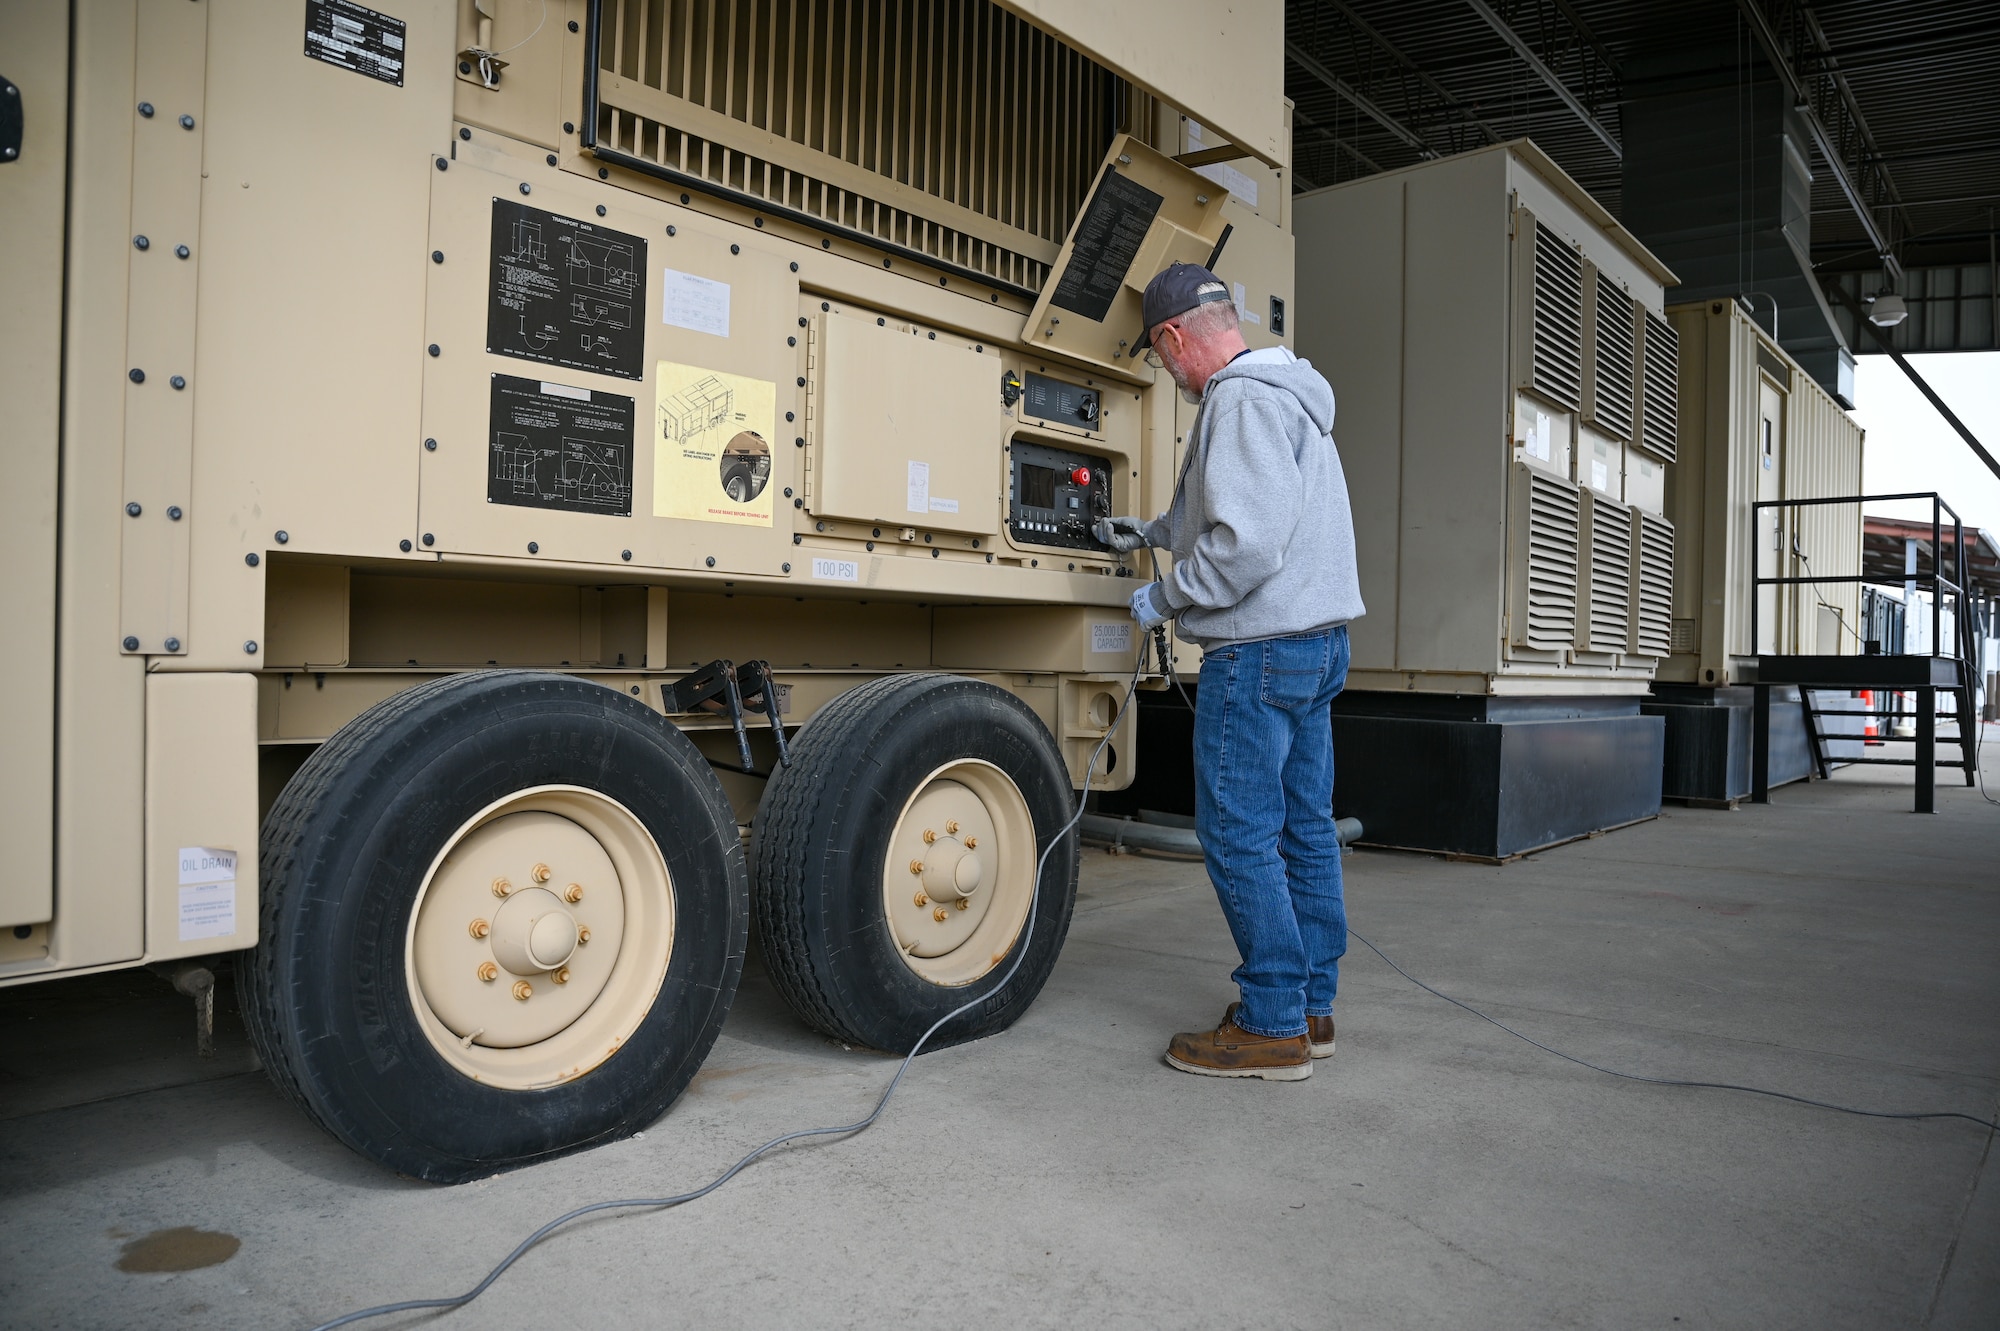 Paul Williams, 526th Electronics Maintenance Squadron, prepares a Base Expeditionary Airfield Resources (BEAR) power unit for testing at Hill Air Force Base, Utah, April 26, 2022. The 526th EMXS activated a new maintenance workload on BEAR units after successfully testing the unit's first repaired asset. BEAR power units are used to power U.S. Air Force forward operating bases. (U.S. Air Force photo by R. Nial Bradshaw)